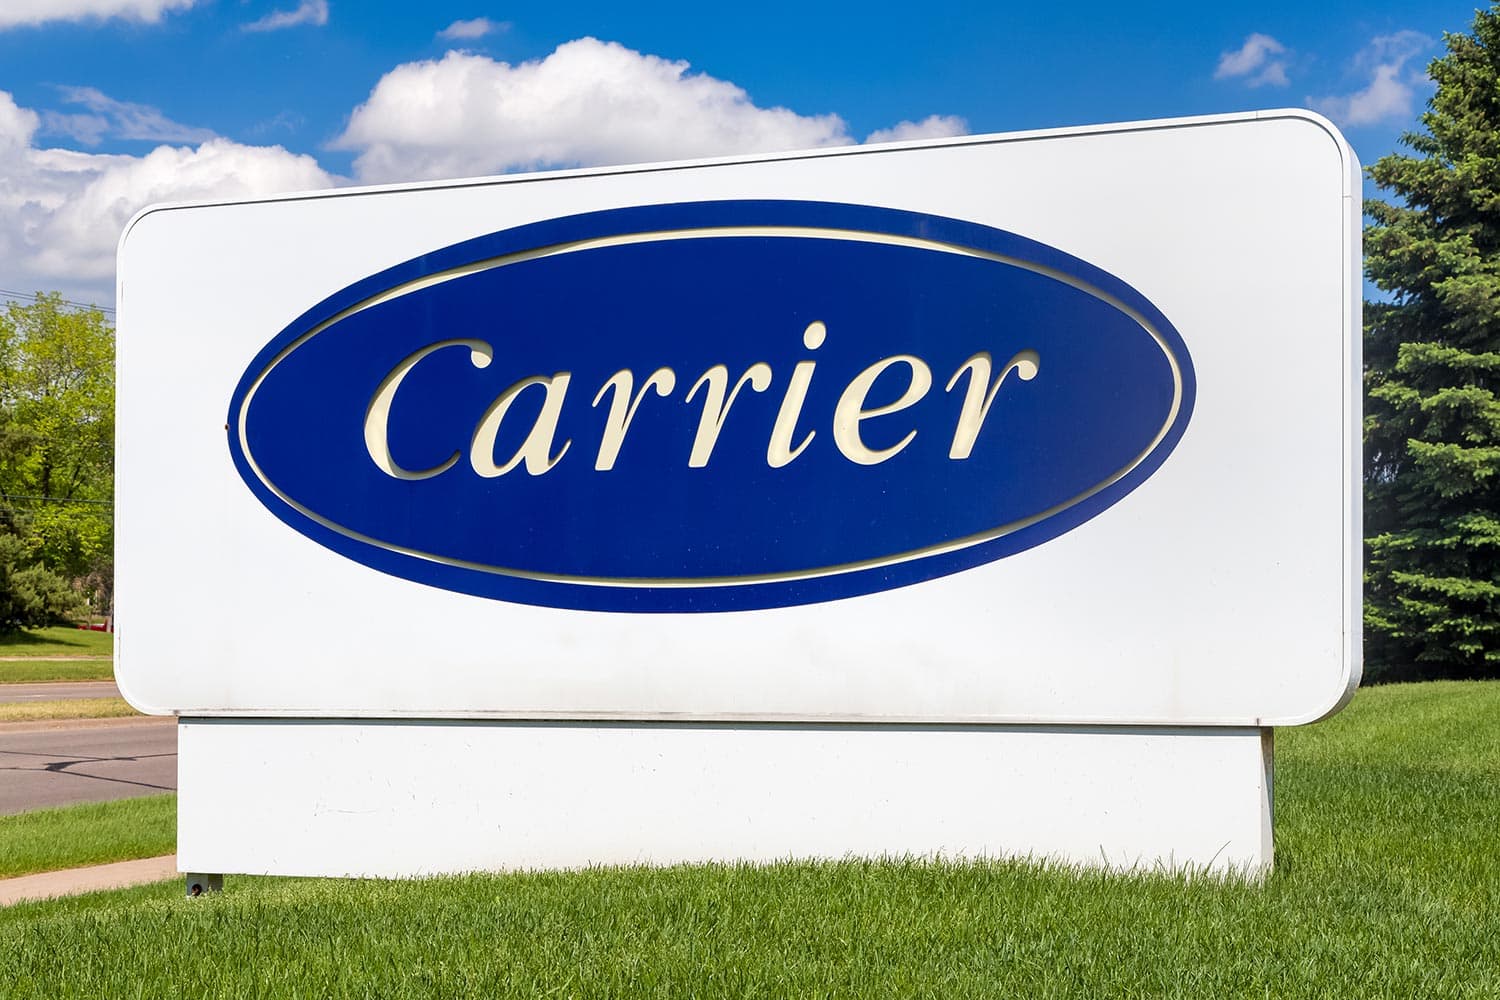 Carrier corporation sign and symbol